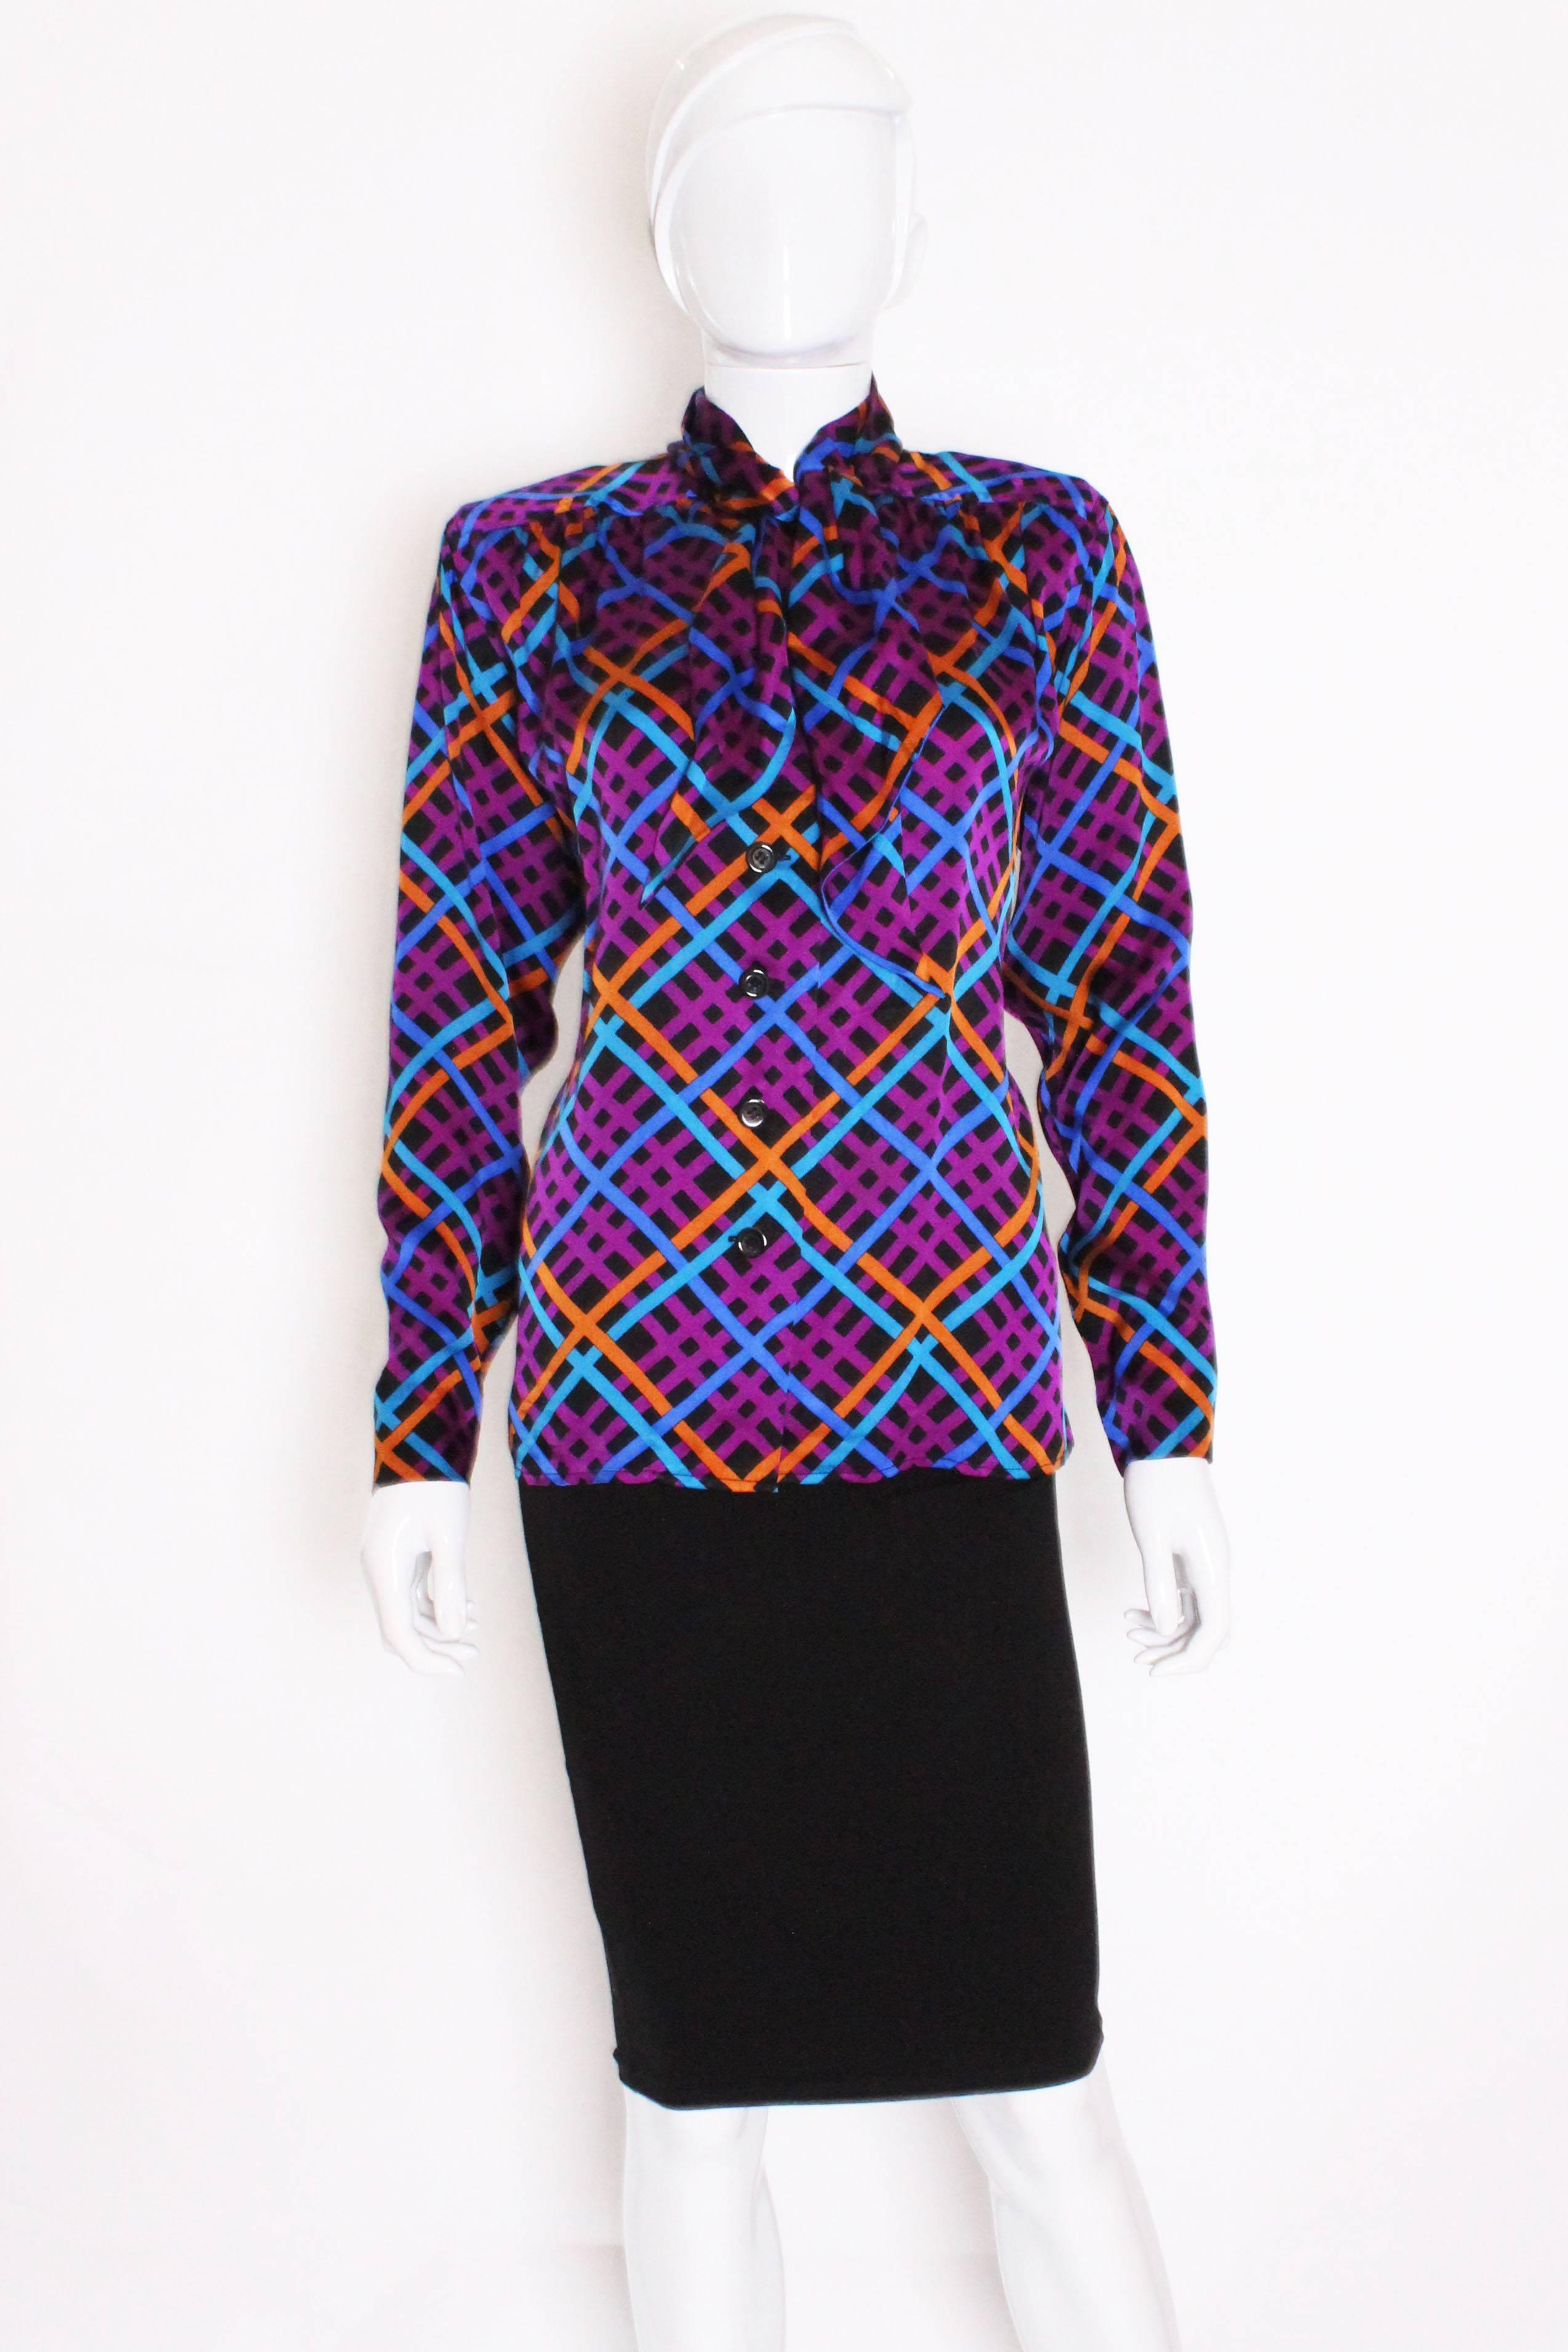 A stunning blouse from Yves Saint Laurent Rive Gauche. As you would expect the silk is of a superior quality and the colours are bold. The blouse has a black background, with orange, purple, blue and turquoise lines running across.There is gathering